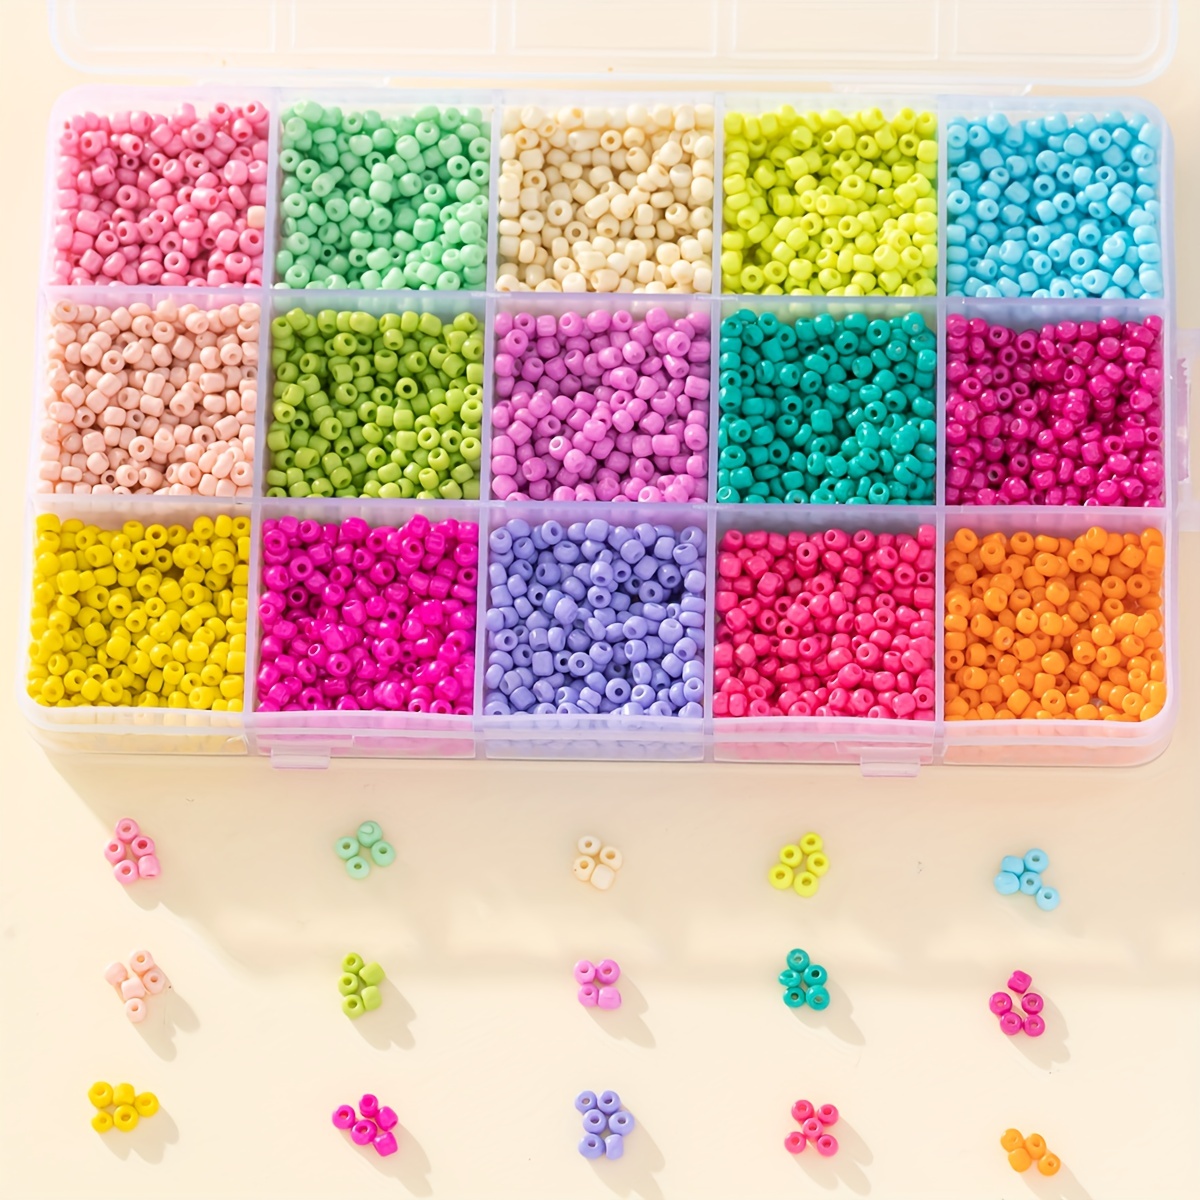 

15-grid 3mm Glass Pony Beads For Bracelet Necklace Waist Chain Making, 15 Colors Small Glass Seed Beads Kit With Plastic Storage Box For Jewelry Making